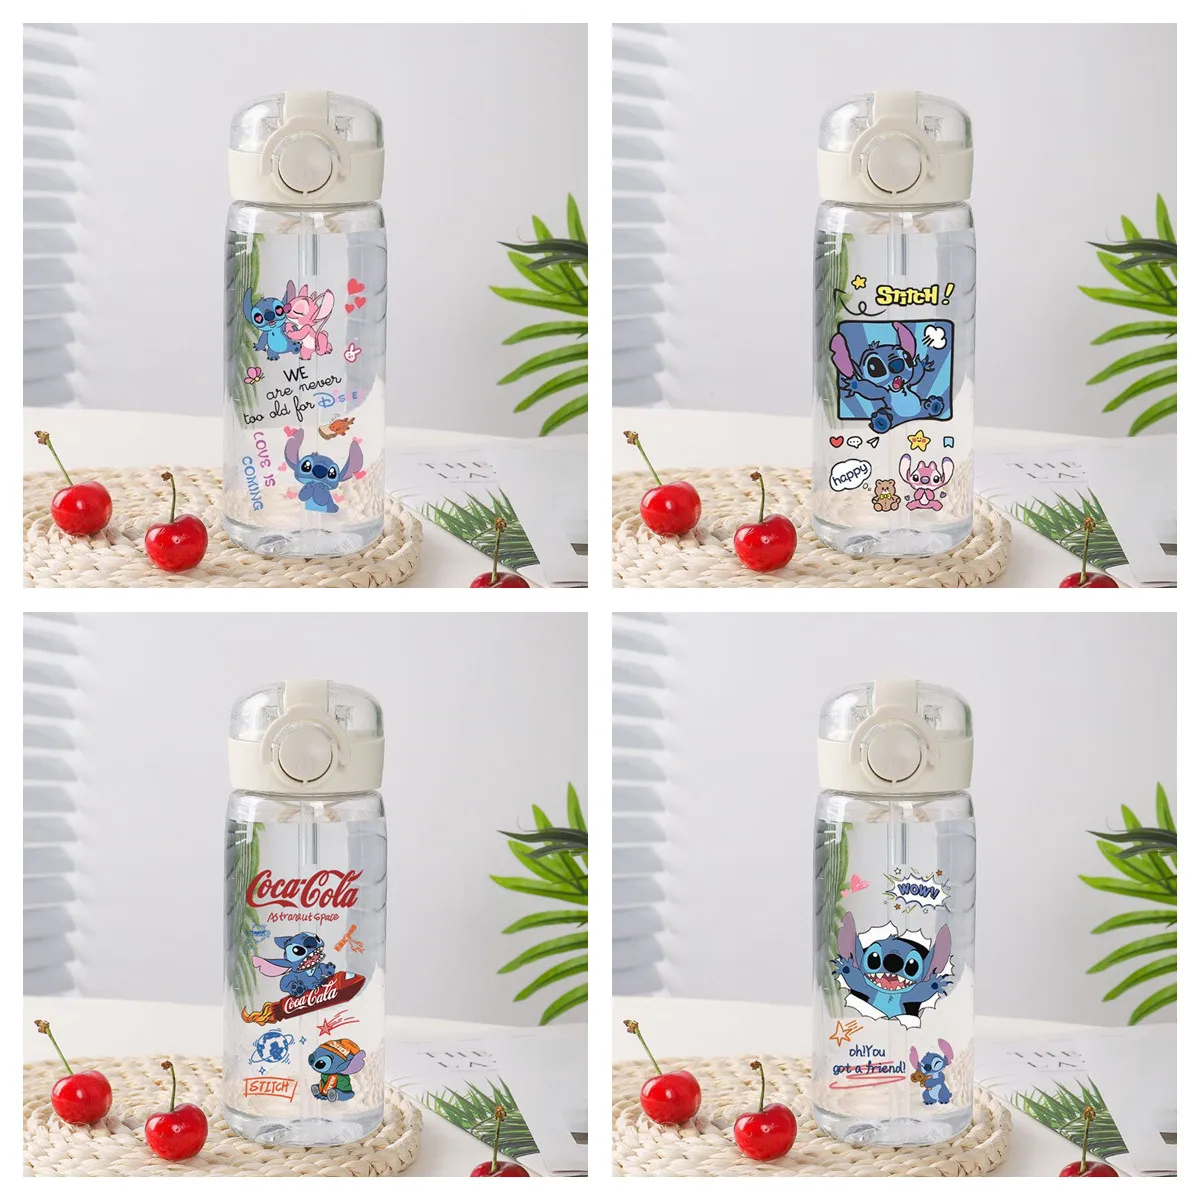 Disney Stitch Sports Water Bottle with Straw 400ML Anime Portable Water  Bottles Fitness Bike Cup Summer Outdoor Water Cup Gifts - AliExpress